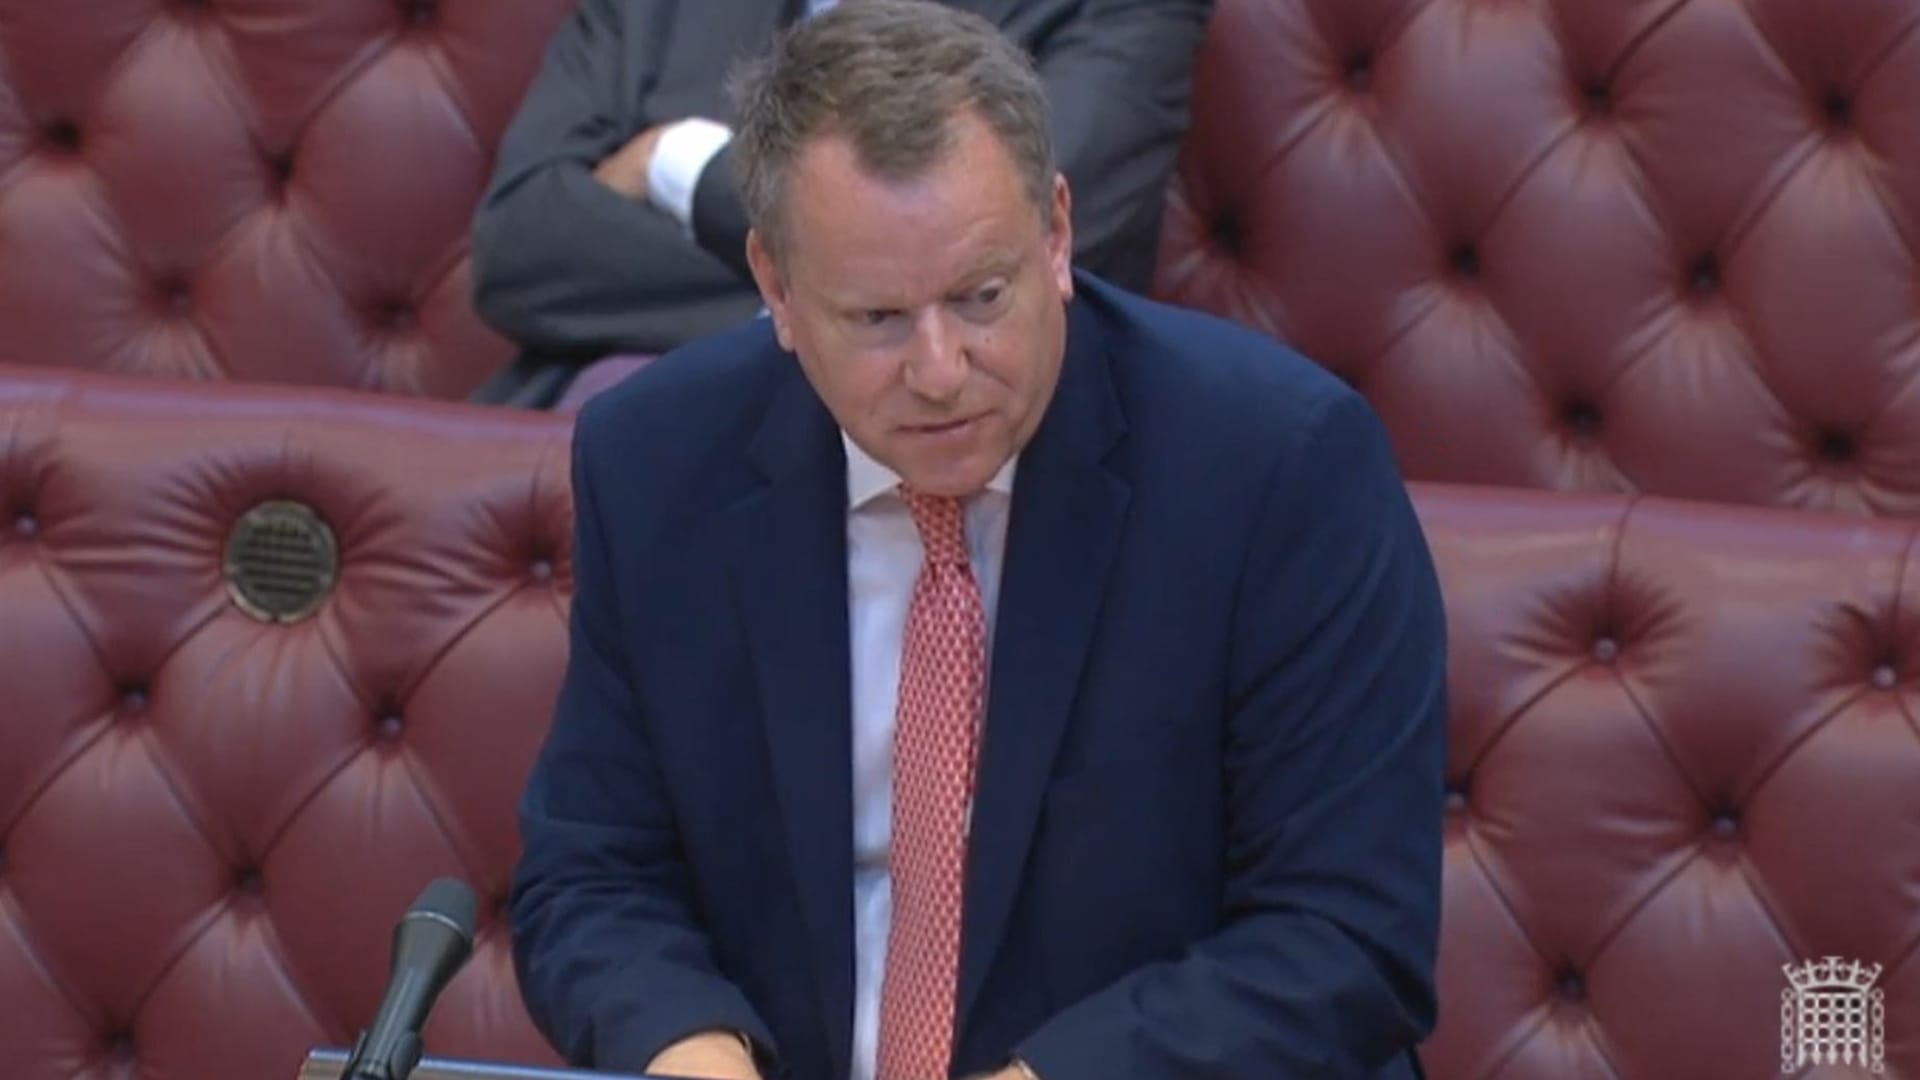 LONDON - Brexit minister Lord Frost making a statement to members of the House of Lords in London on the government's approach to the Northern Ireland Protocol.